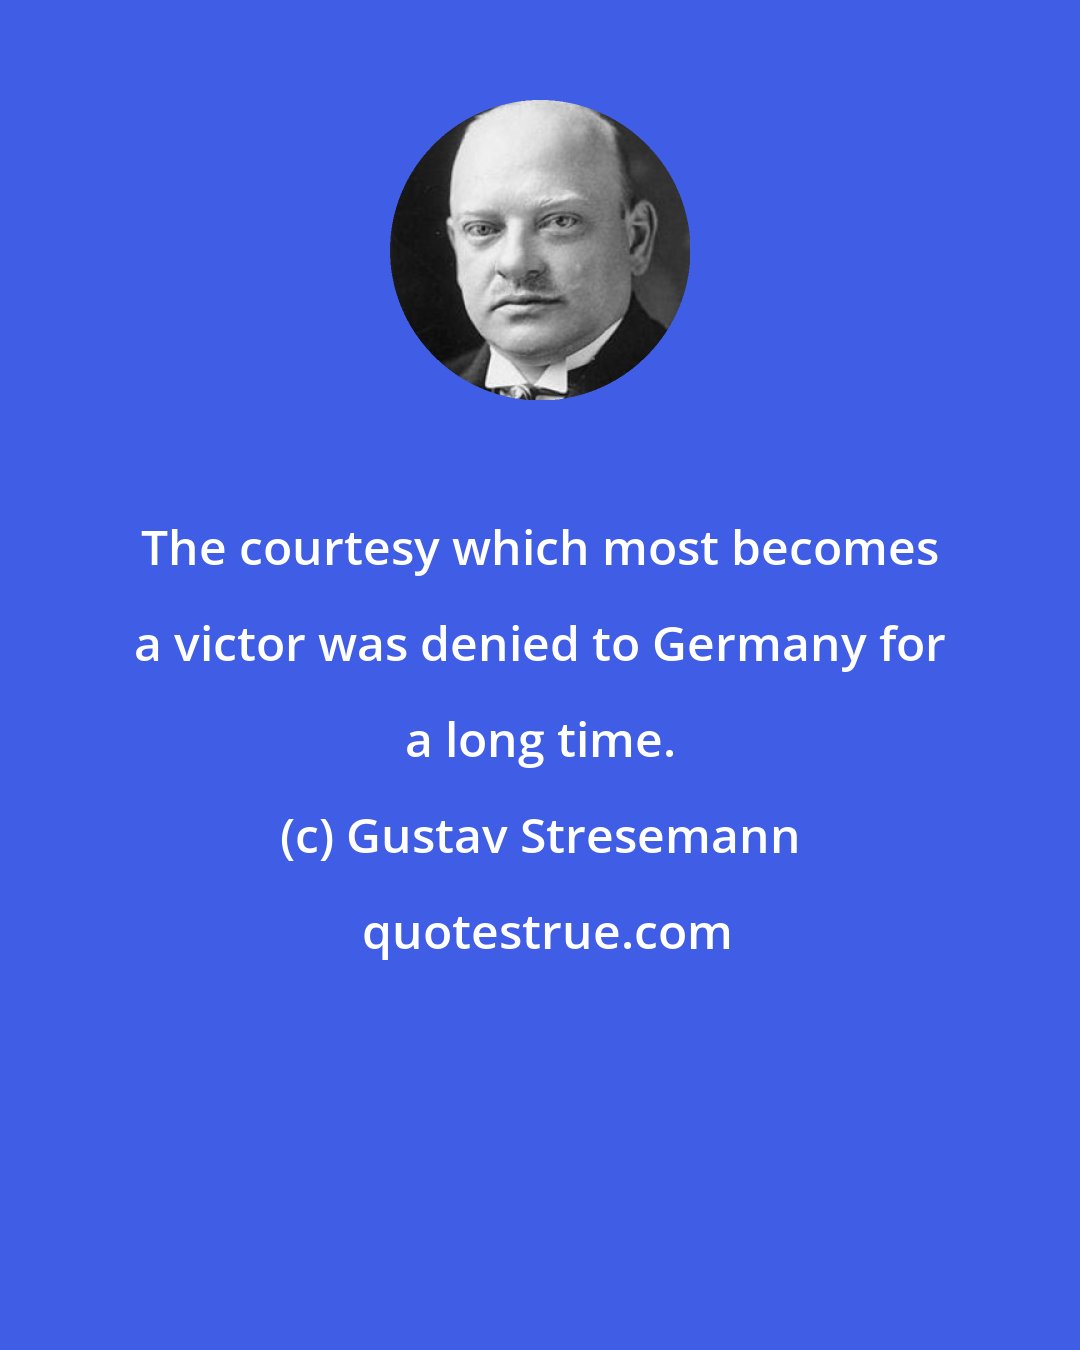 Gustav Stresemann: The courtesy which most becomes a victor was denied to Germany for a long time.